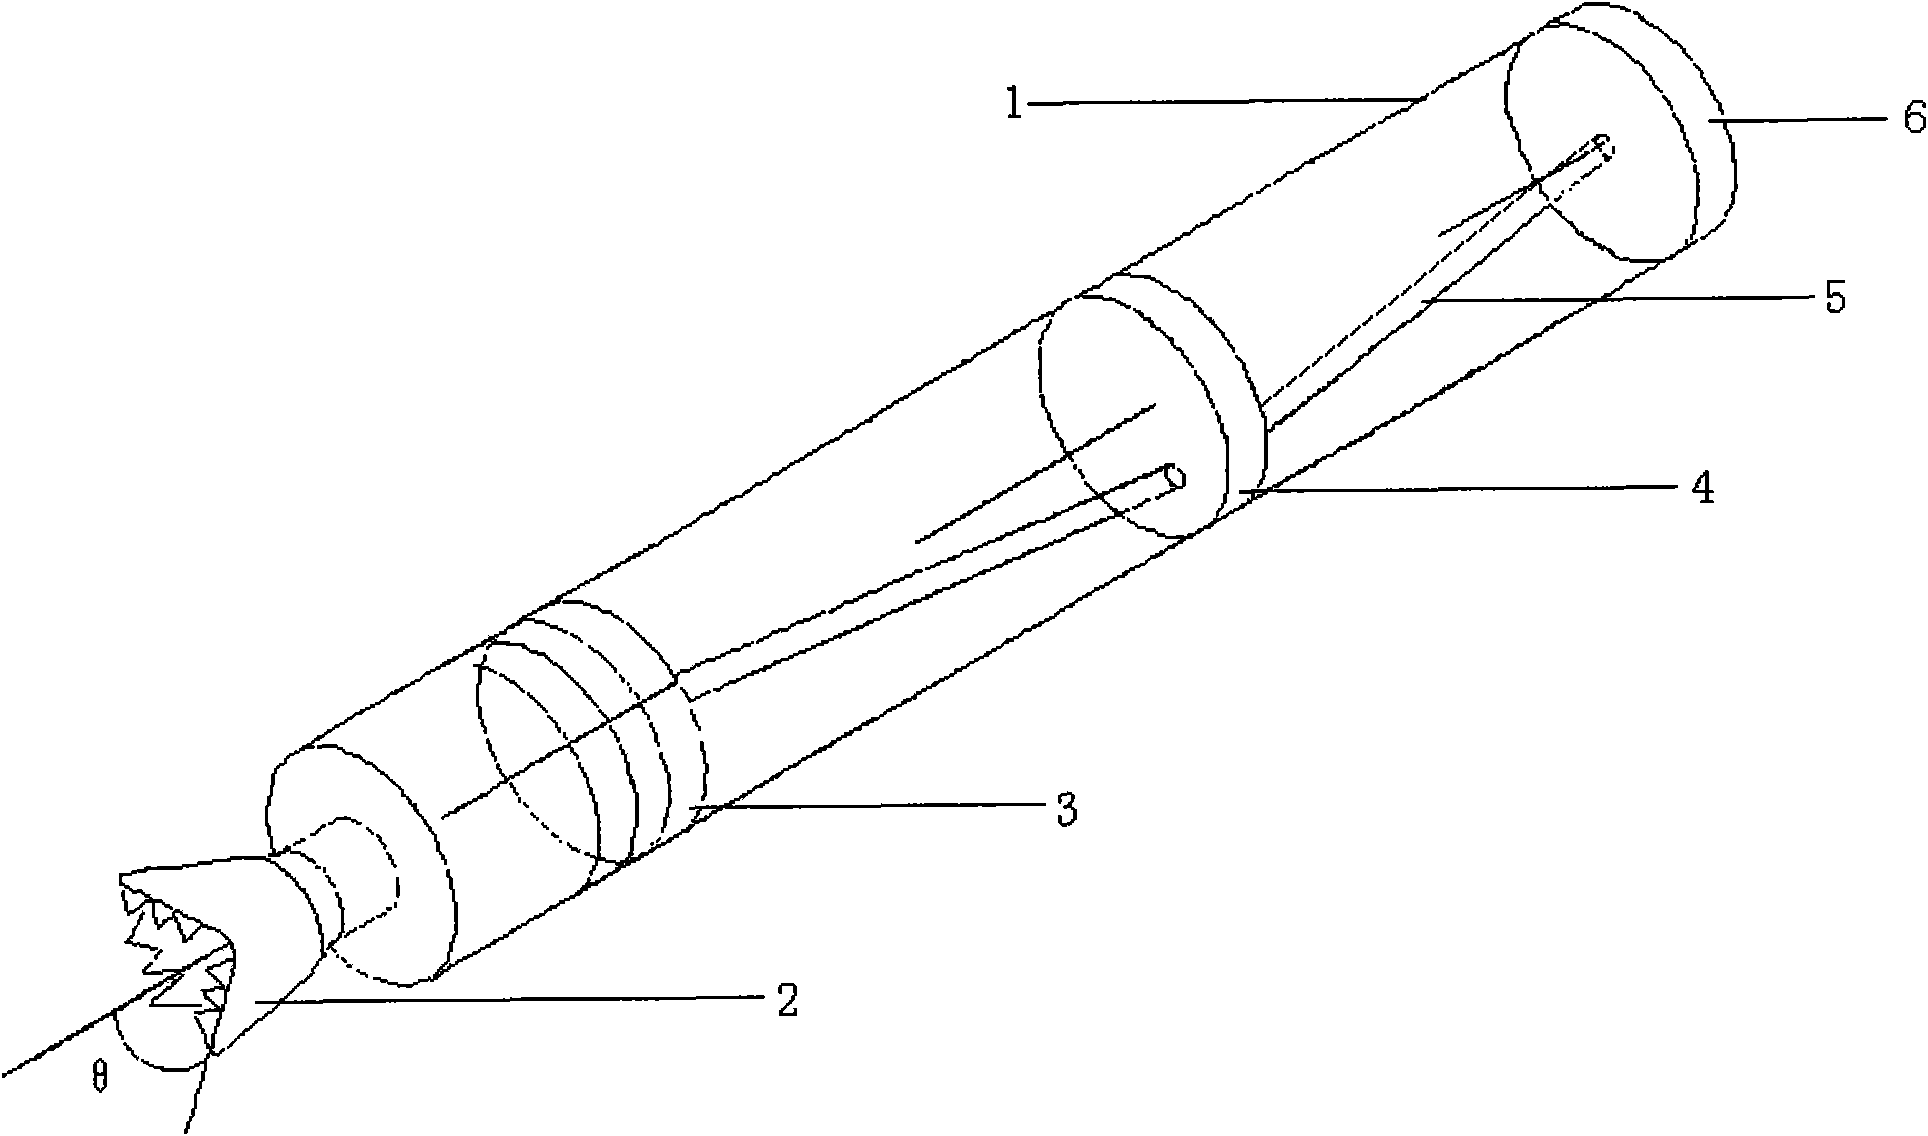 Structure design method for guiding type rotary steering drilling tool